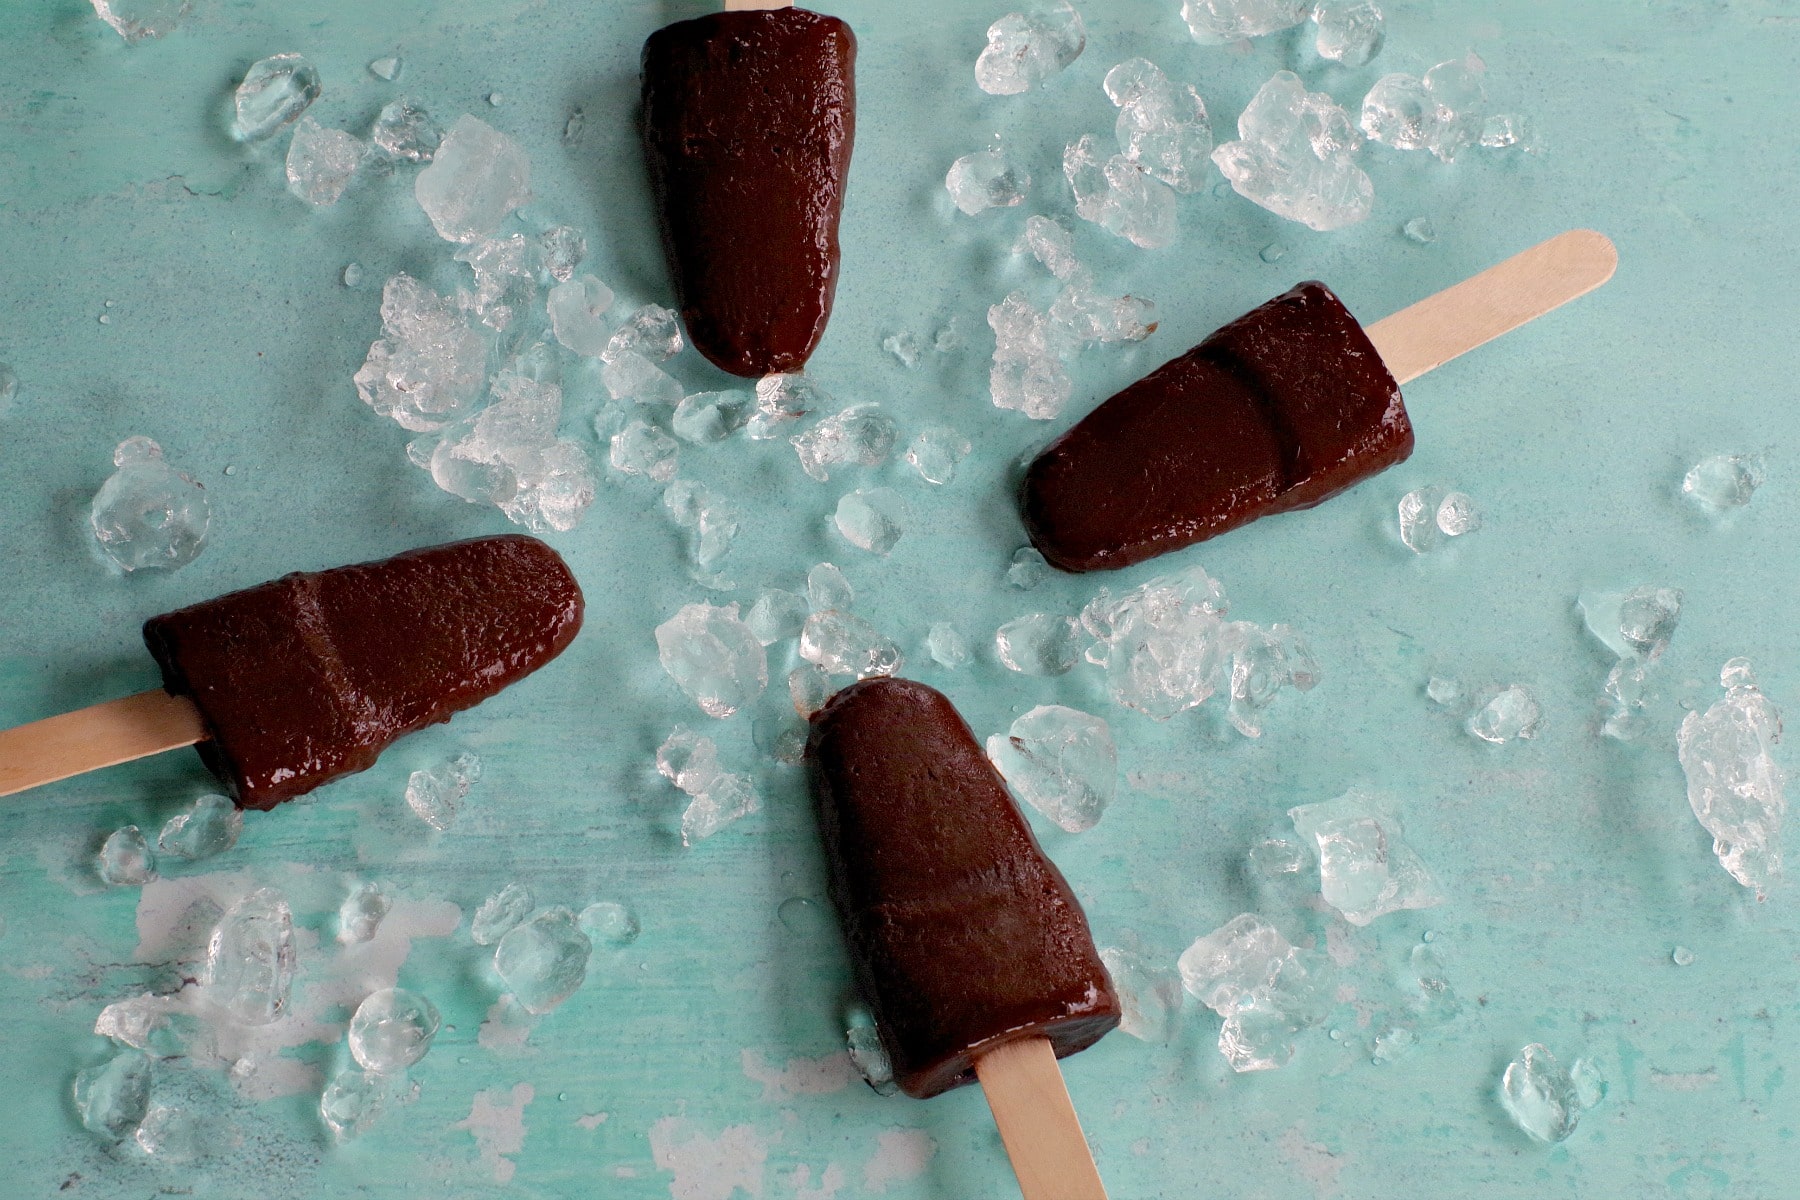 4 chocolate and banana popsicles with ice, laying flat on aqua blue surface